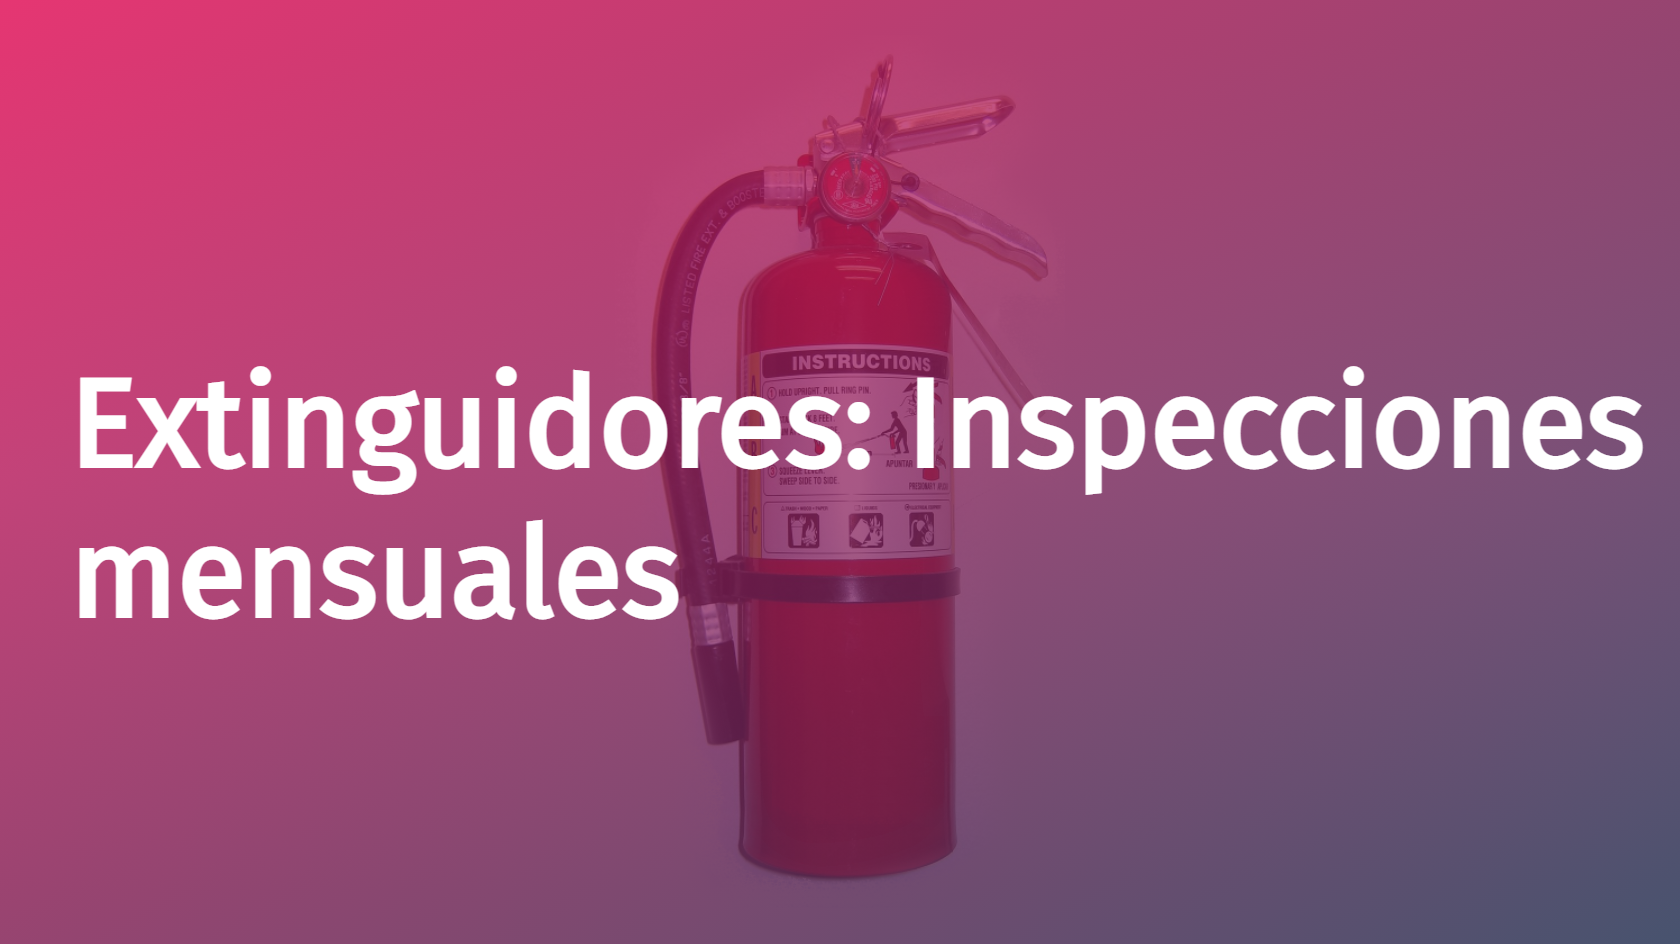 Spanish - Fire Extinguishers: Monthly Inspections